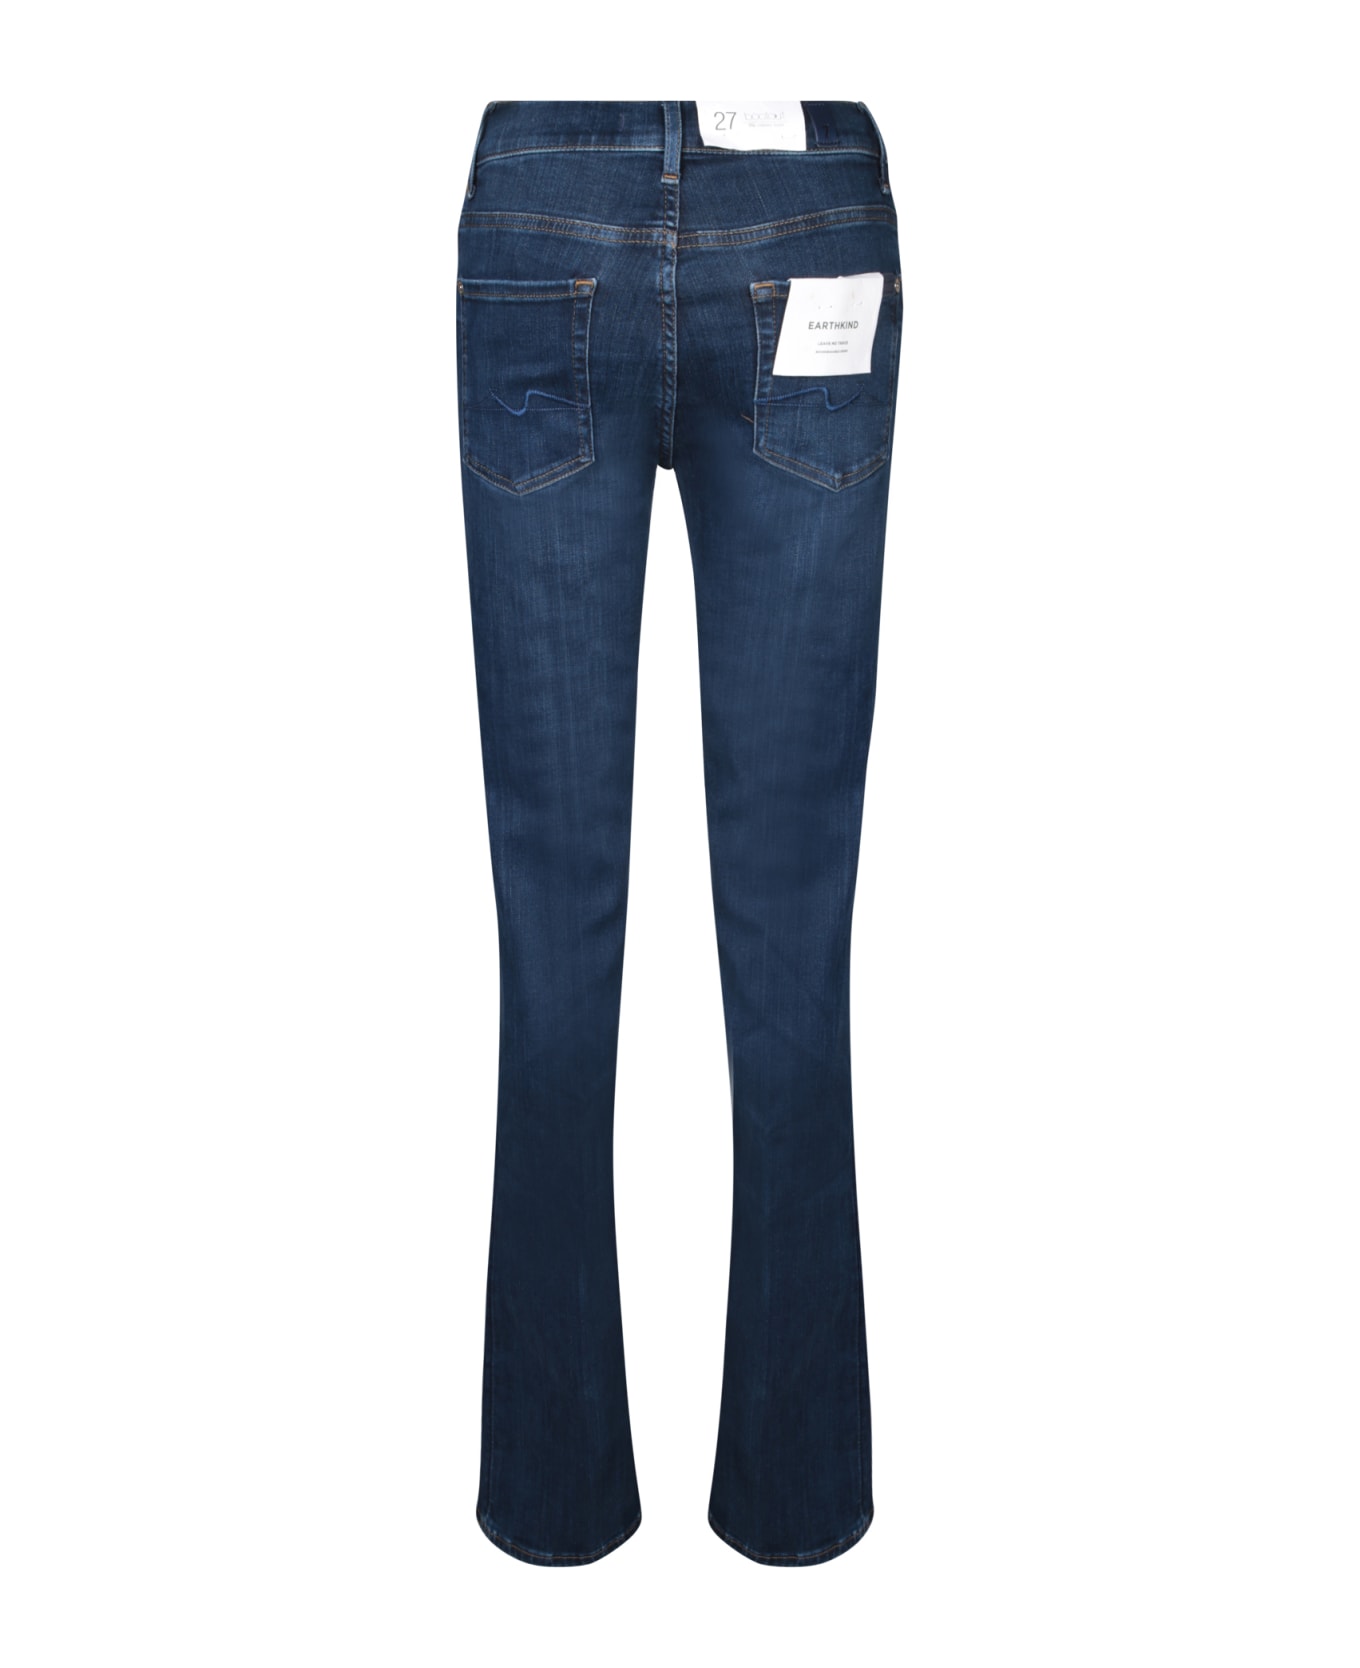 7 For All Mankind Bootcut Blue Jeans - Blue